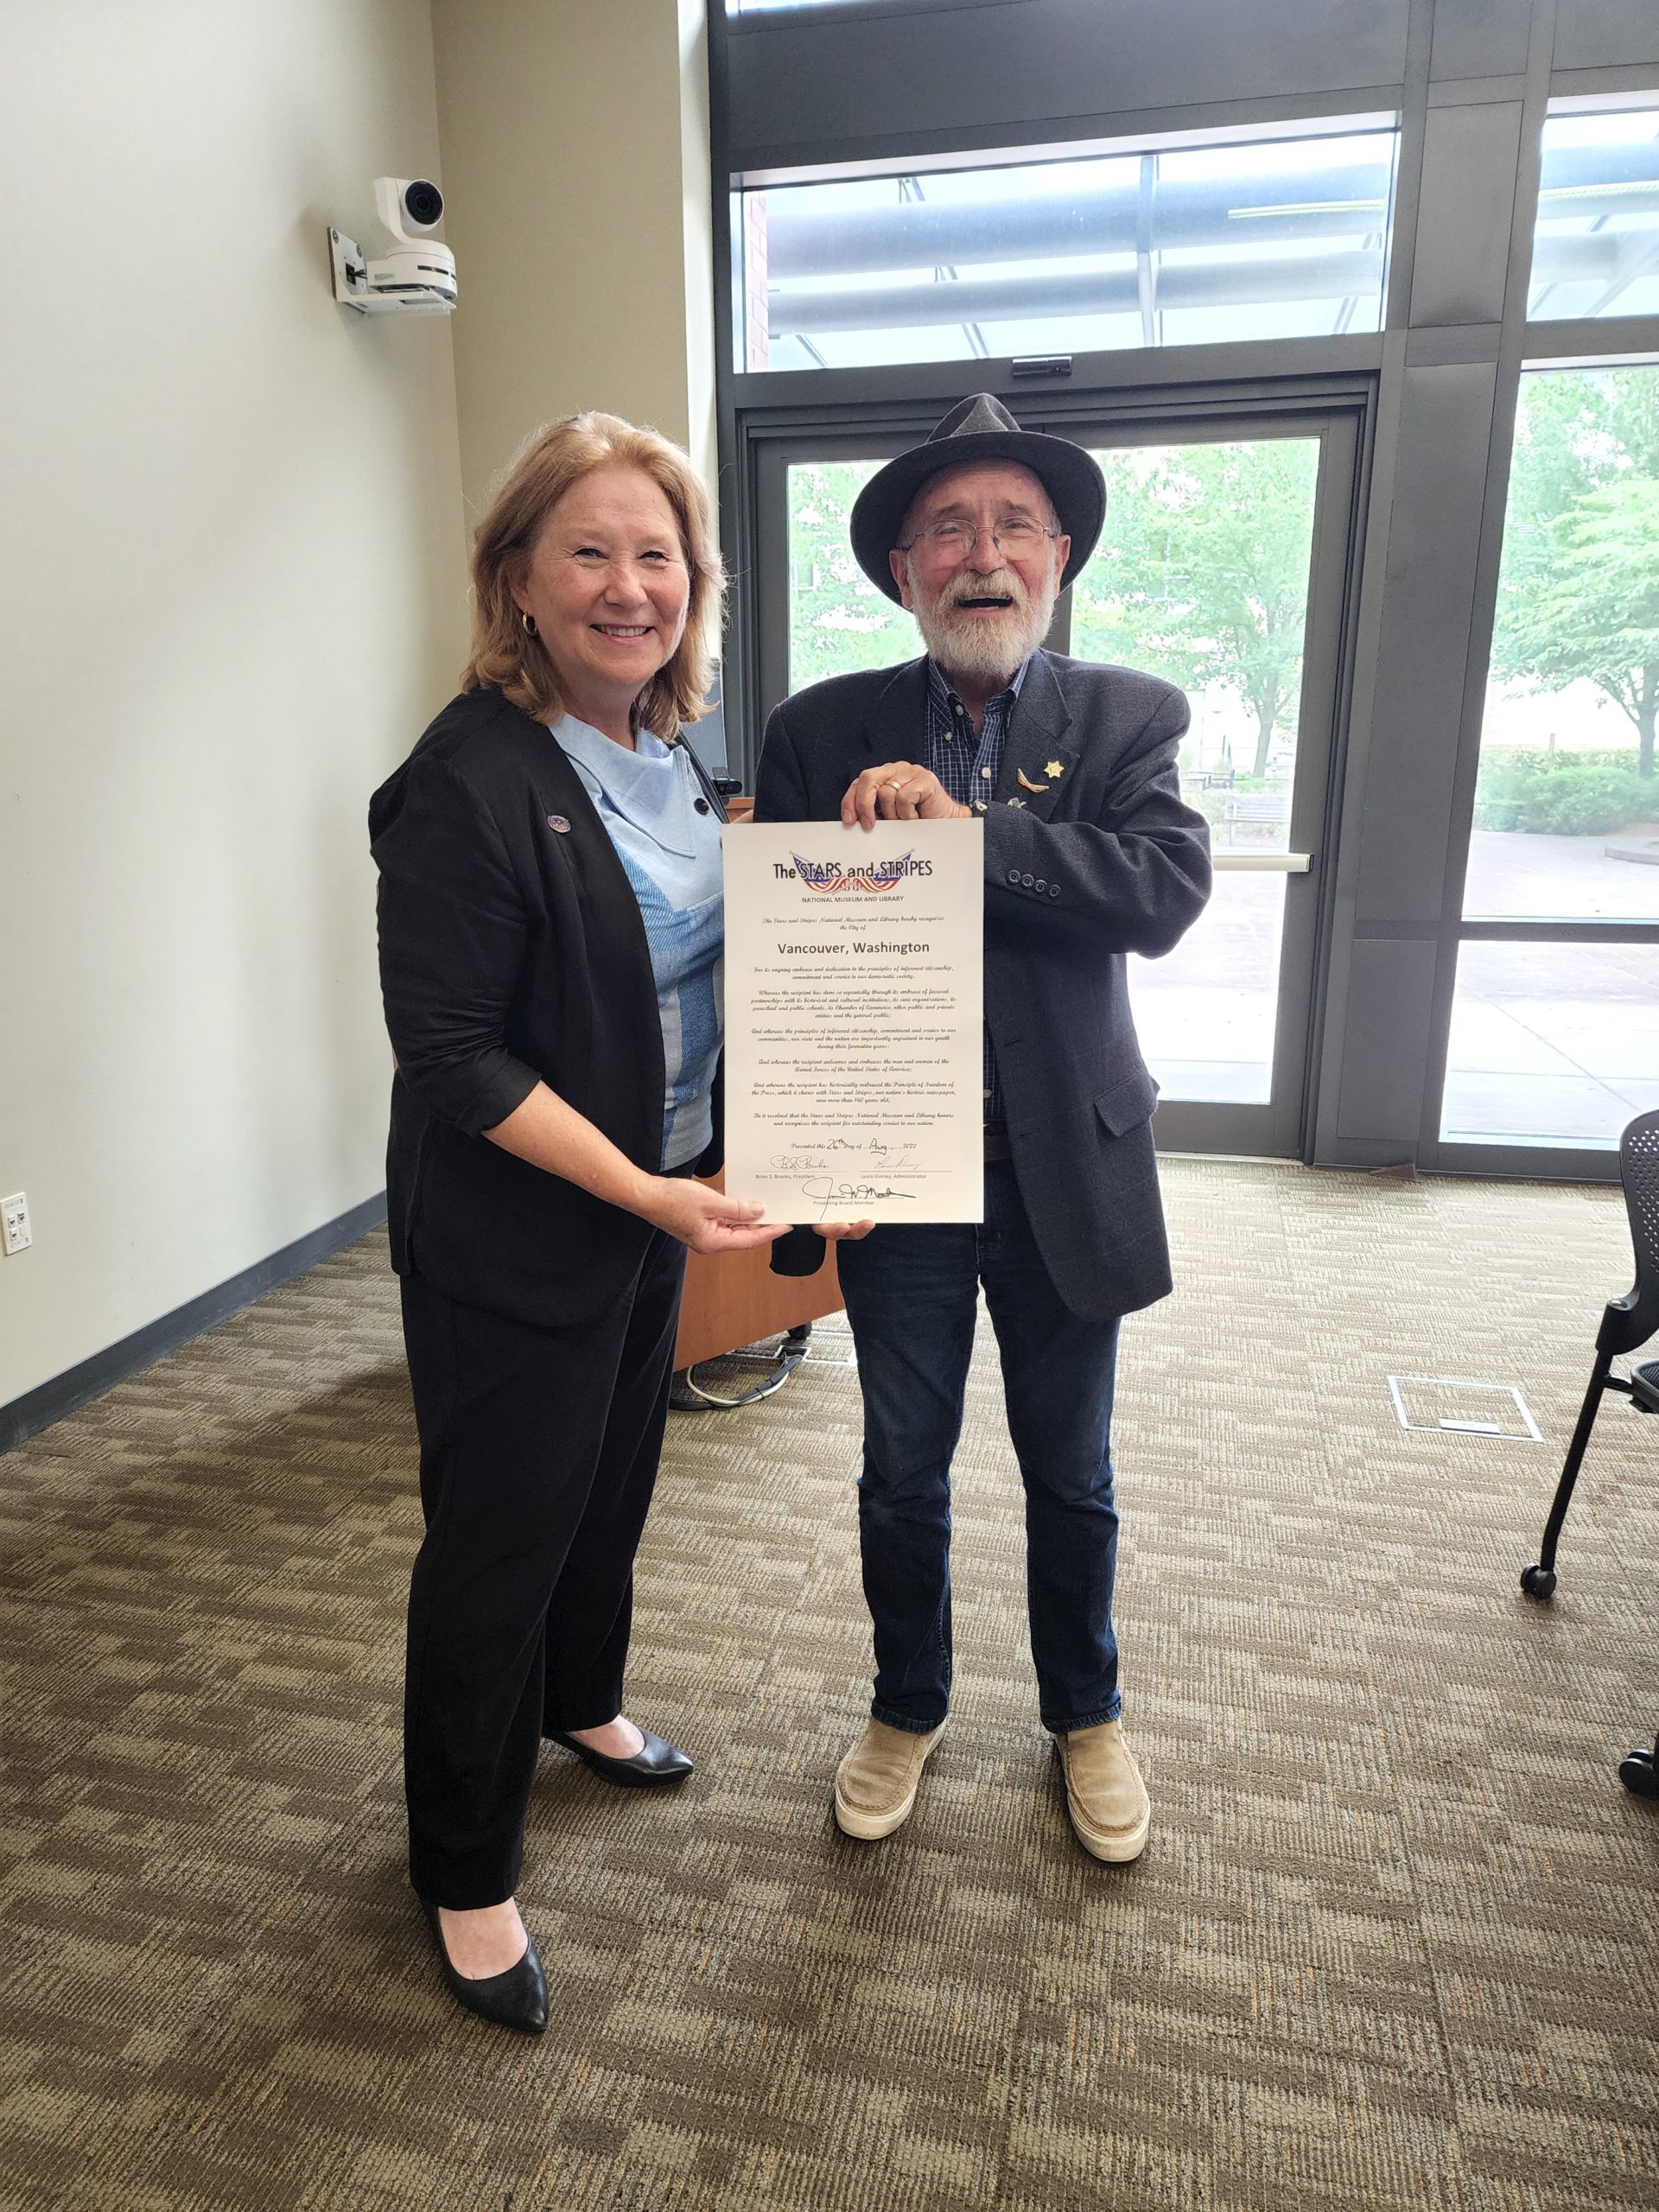 On Friday, August 26, 2022, Jim Martin presented the Stars and Stripes City Proclamation to Vancouver, Washington.